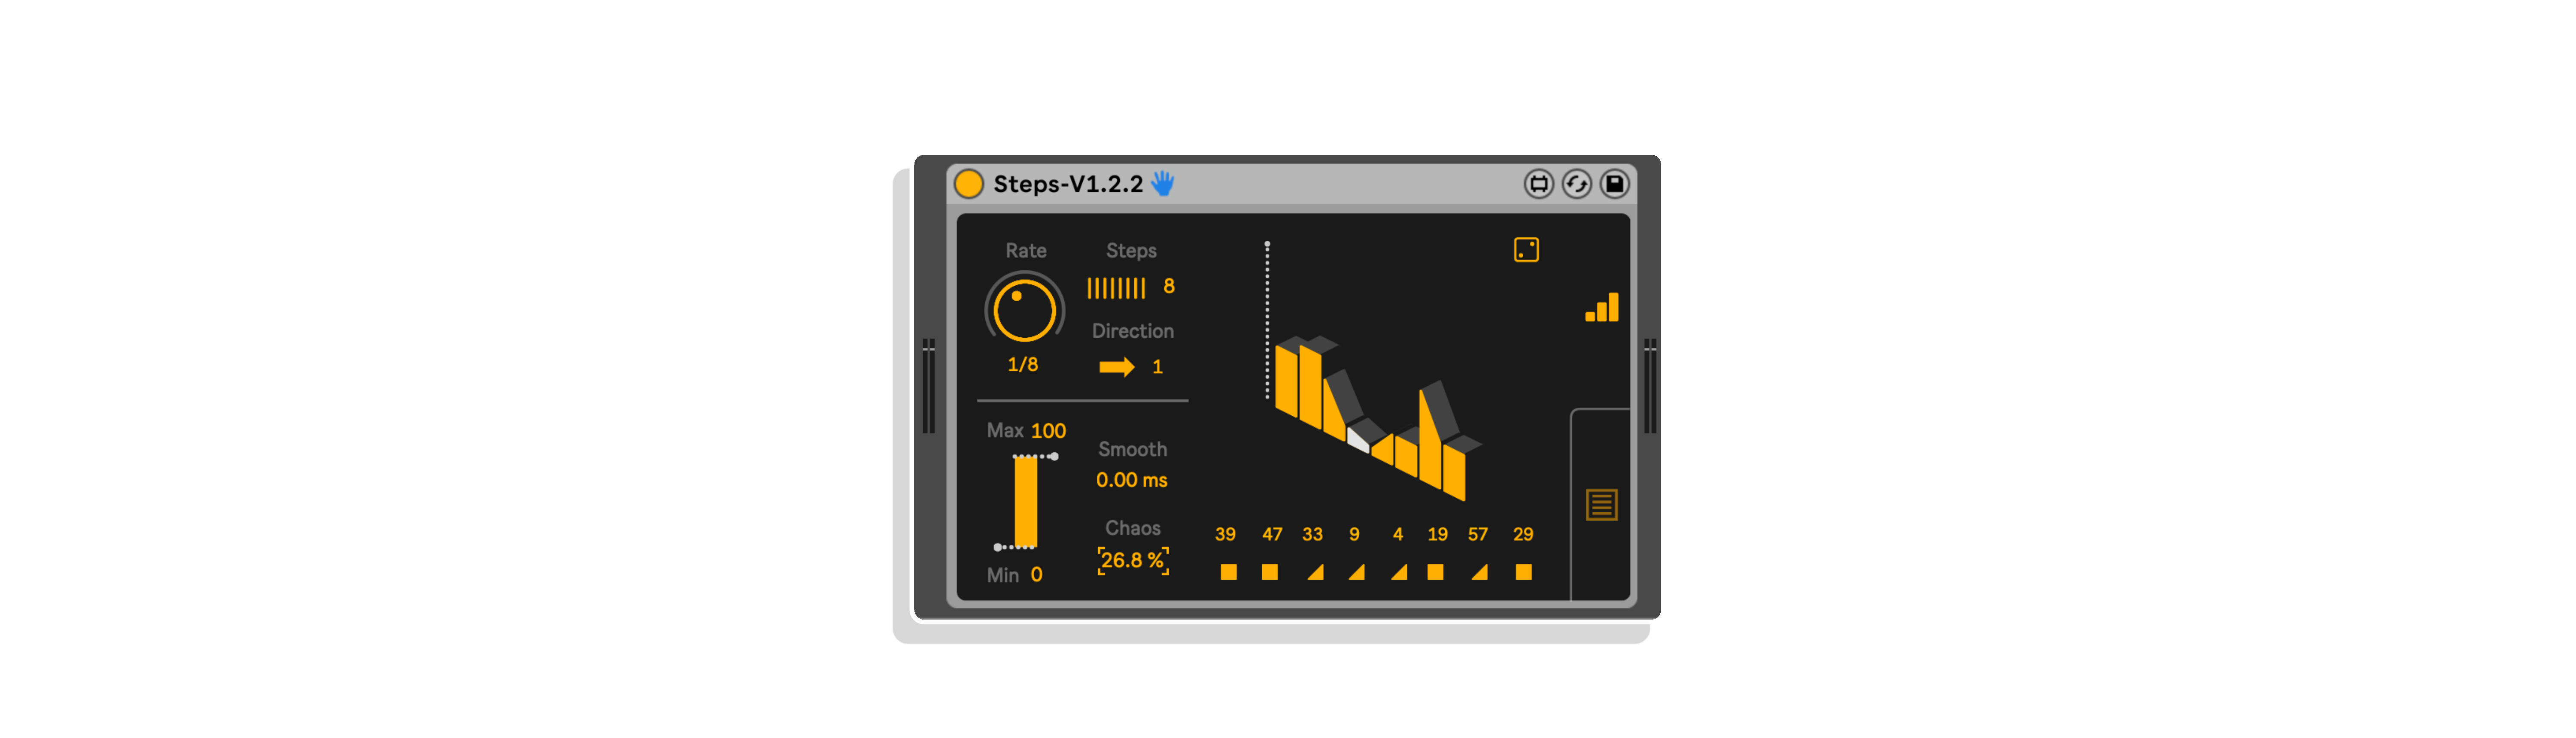 Steps 1.2 MaxforLive Device for Ableton Live by Rainbow Circuit